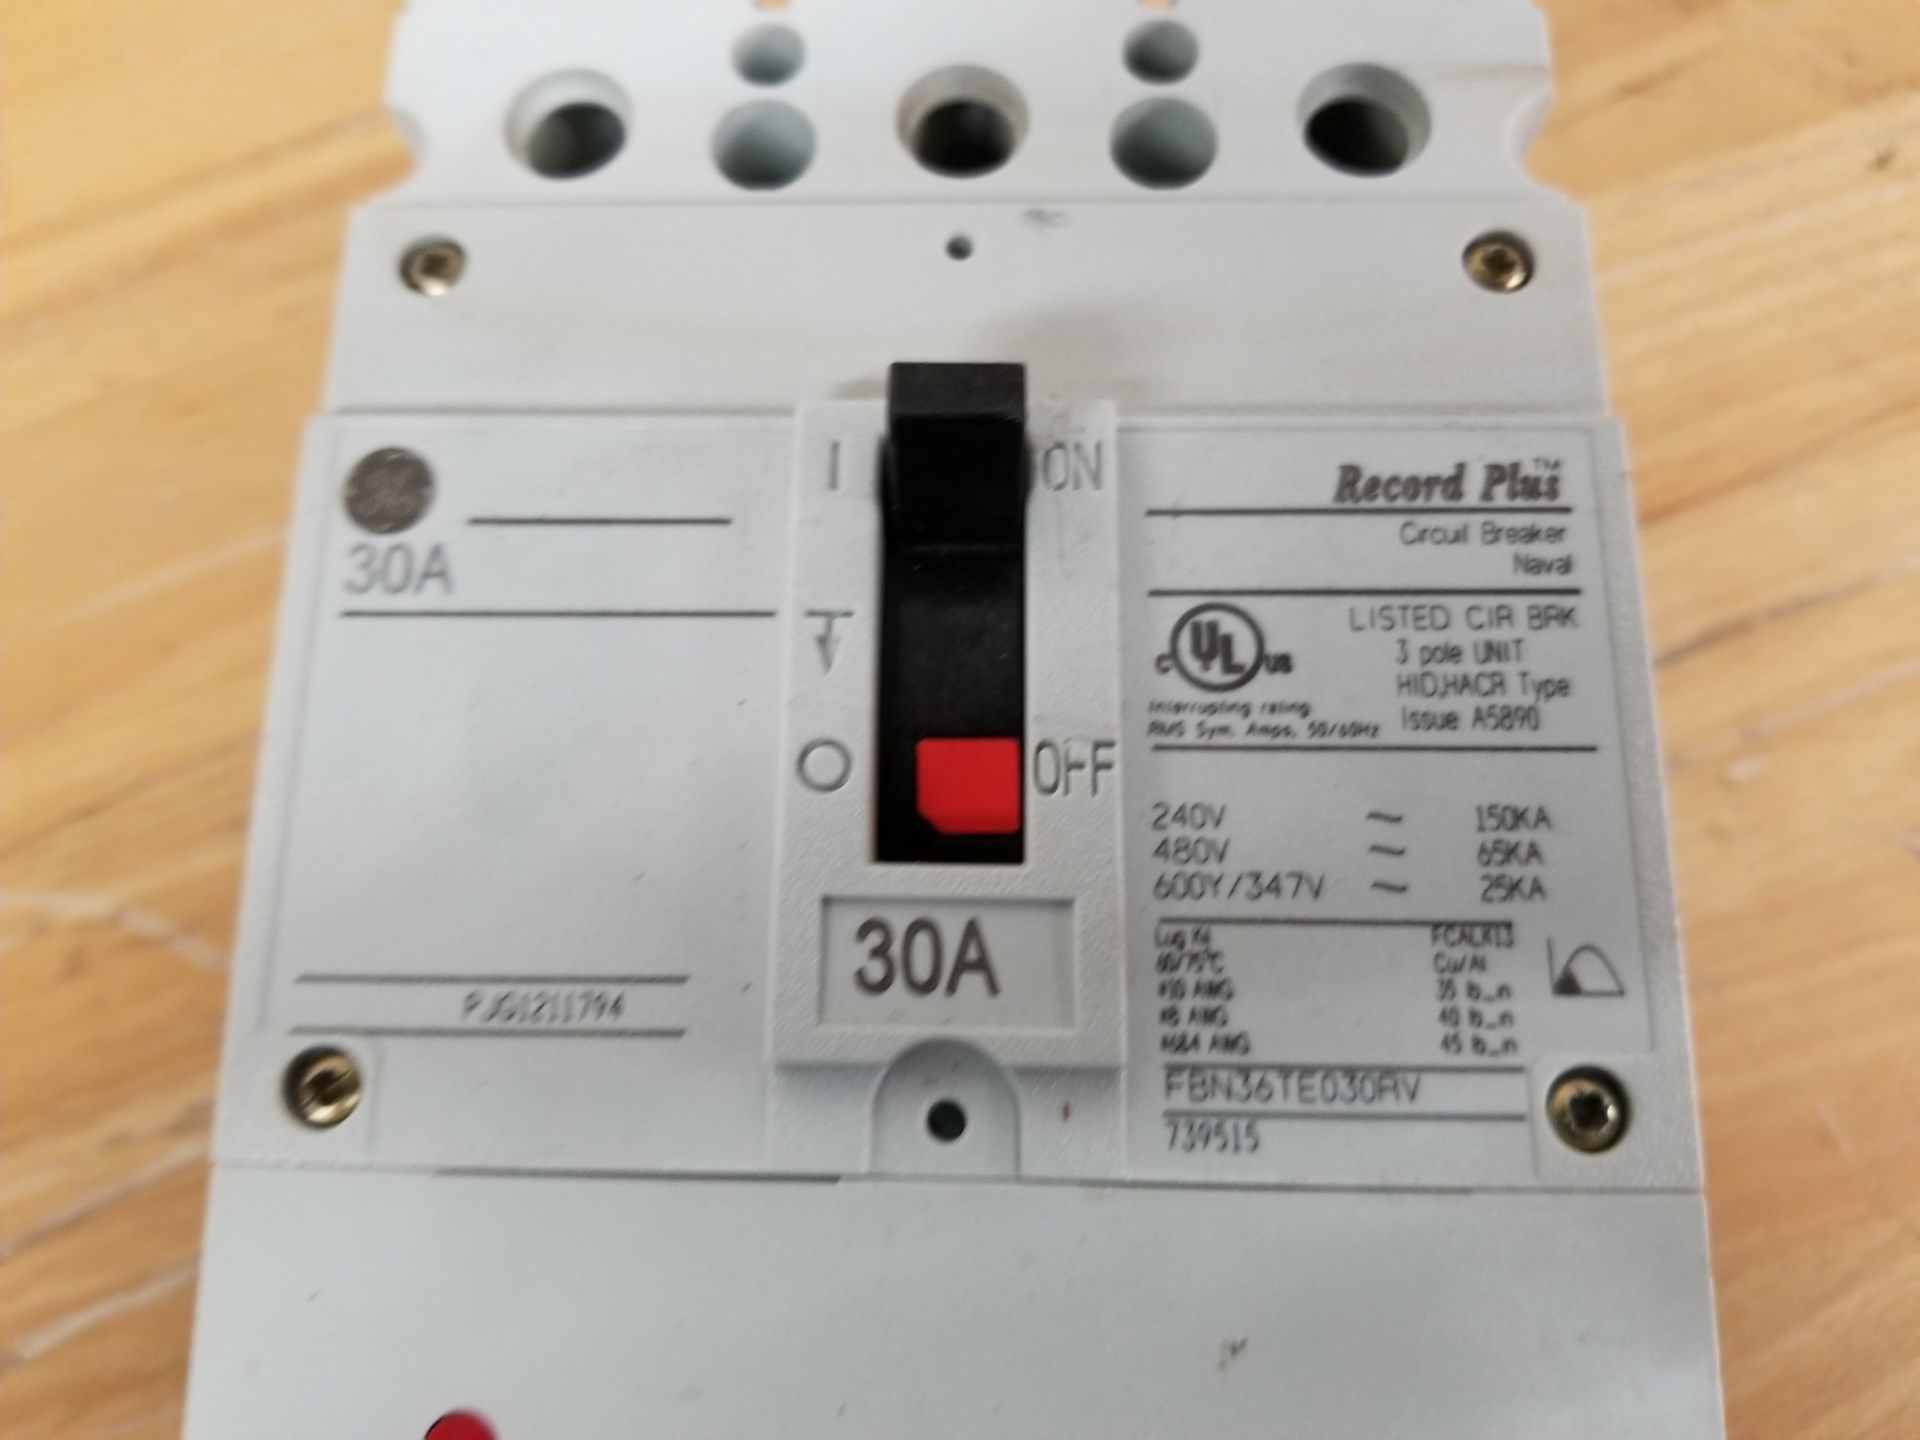 GE RECORD PLUS 30A MOLDED CASE CIRCUIT BREAKER - Image 6 of 6